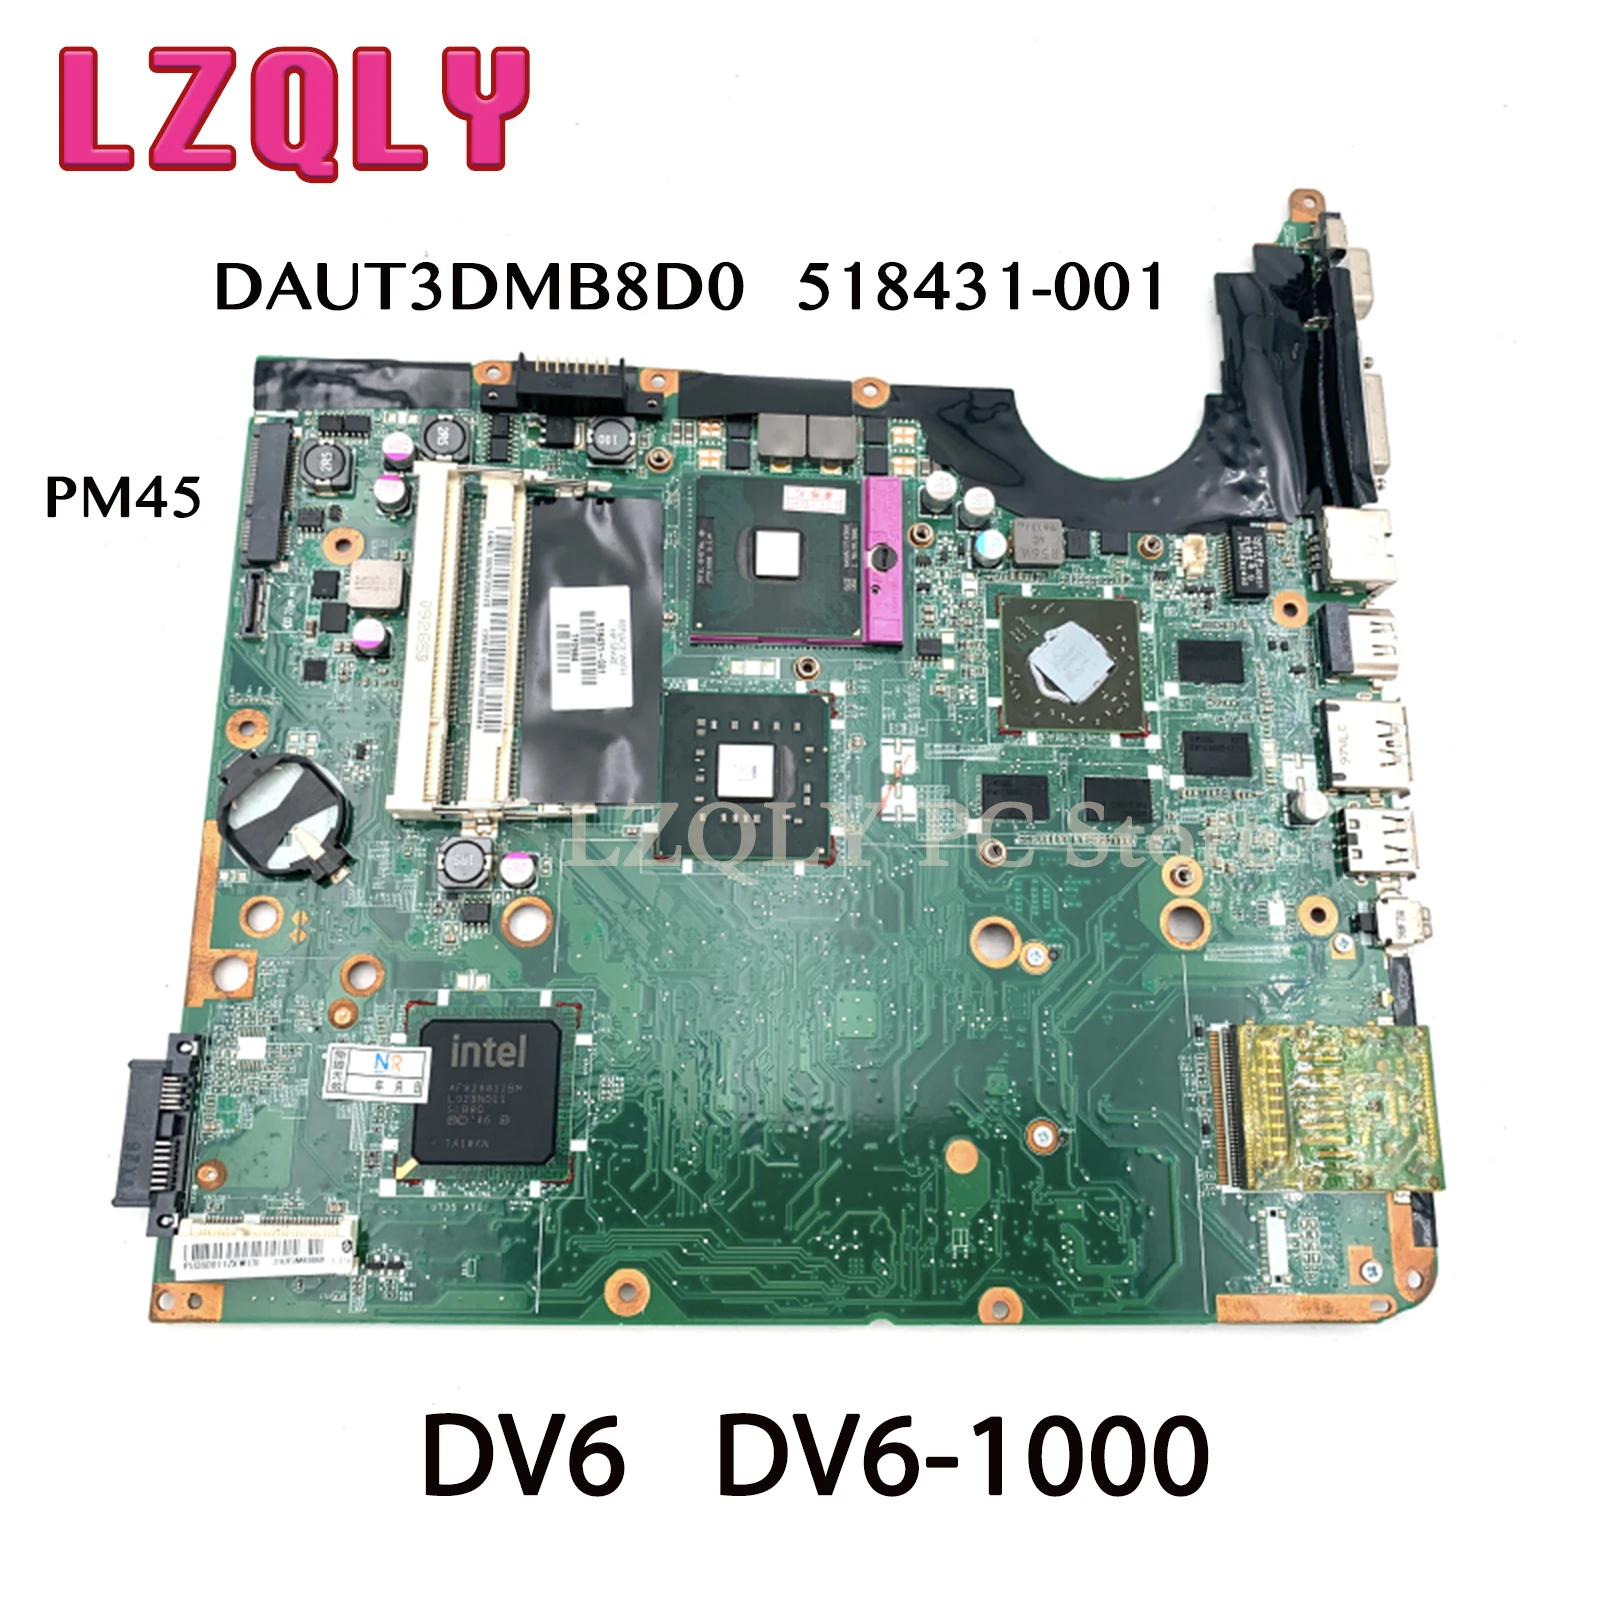 

LZQLY For HP Pavilion DV6 DV6-1000 DAUT3DMB8D0 518431-001 PM45 Laptop Motherboard DDR2 HD4650 GPU With Free CPU Fully Tested